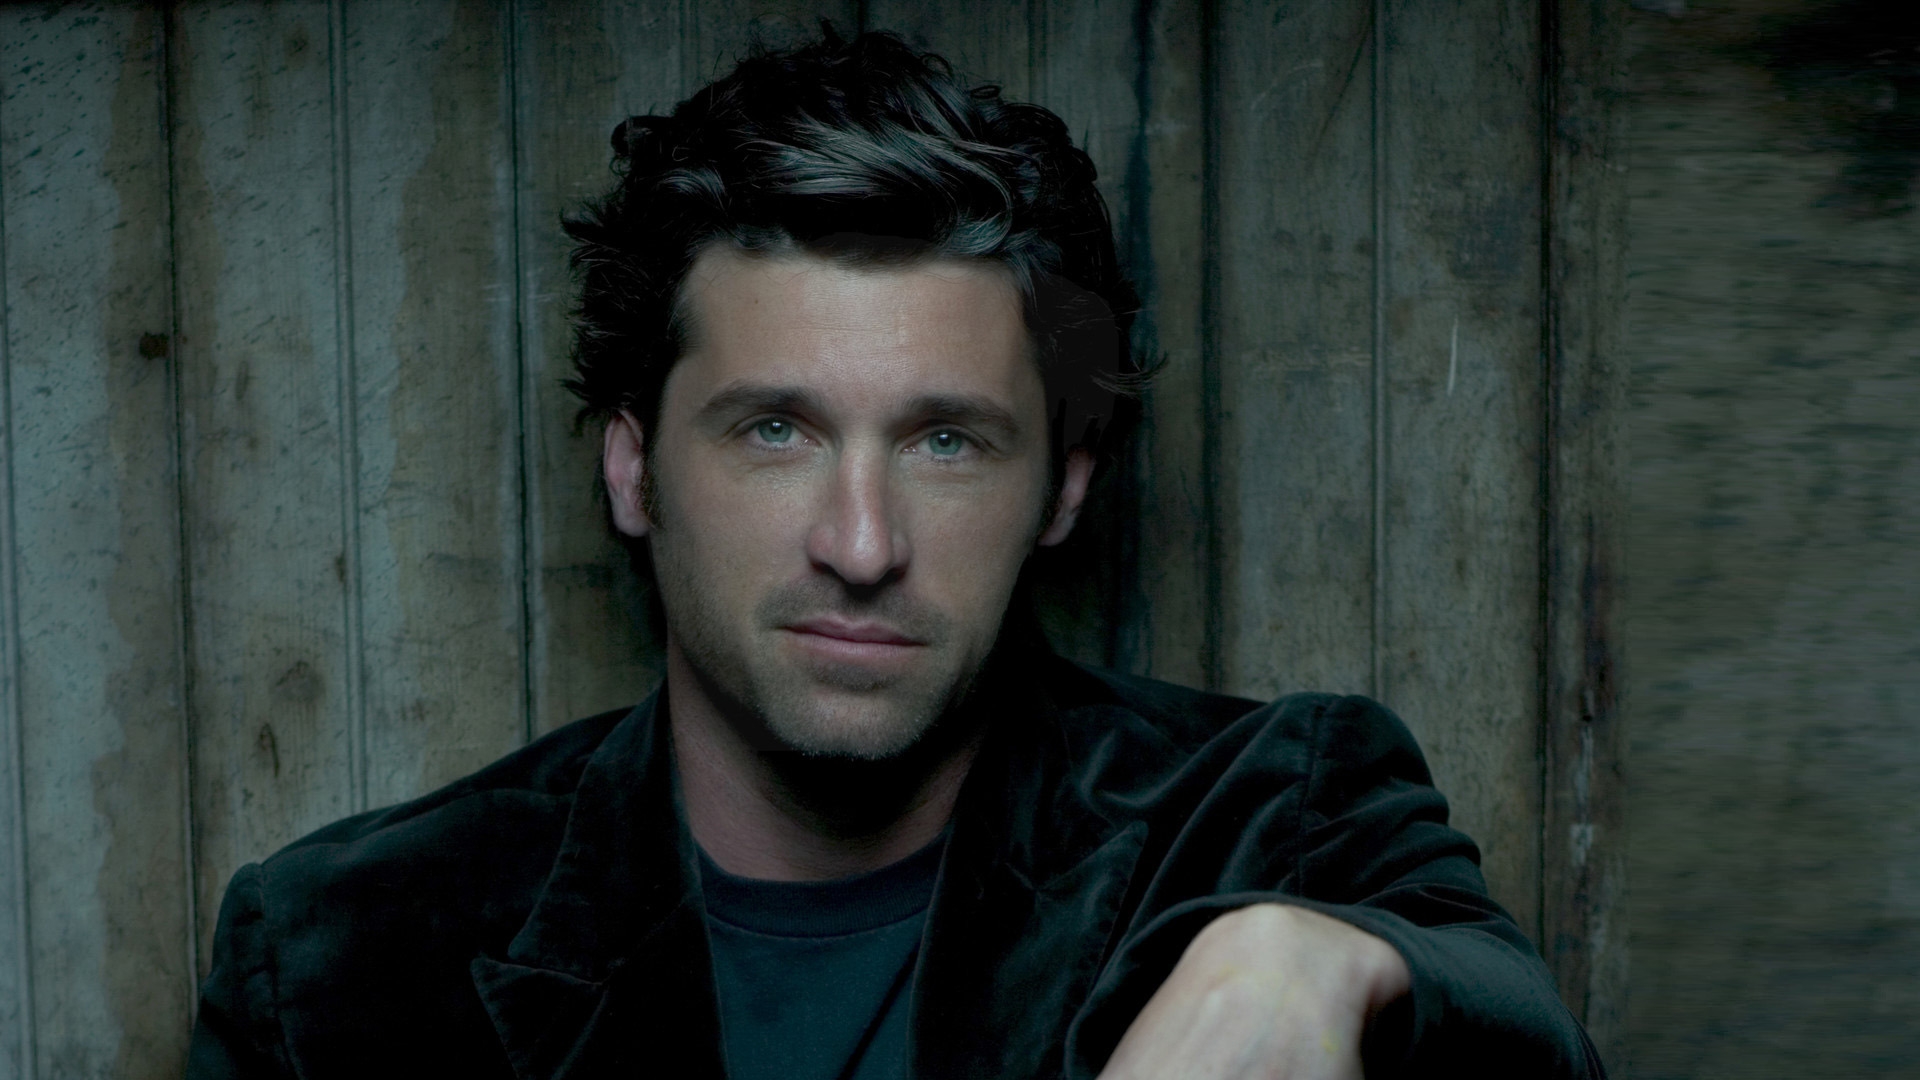 Patrick Dempsey Look for 1920 x 1080 HDTV 1080p resolution